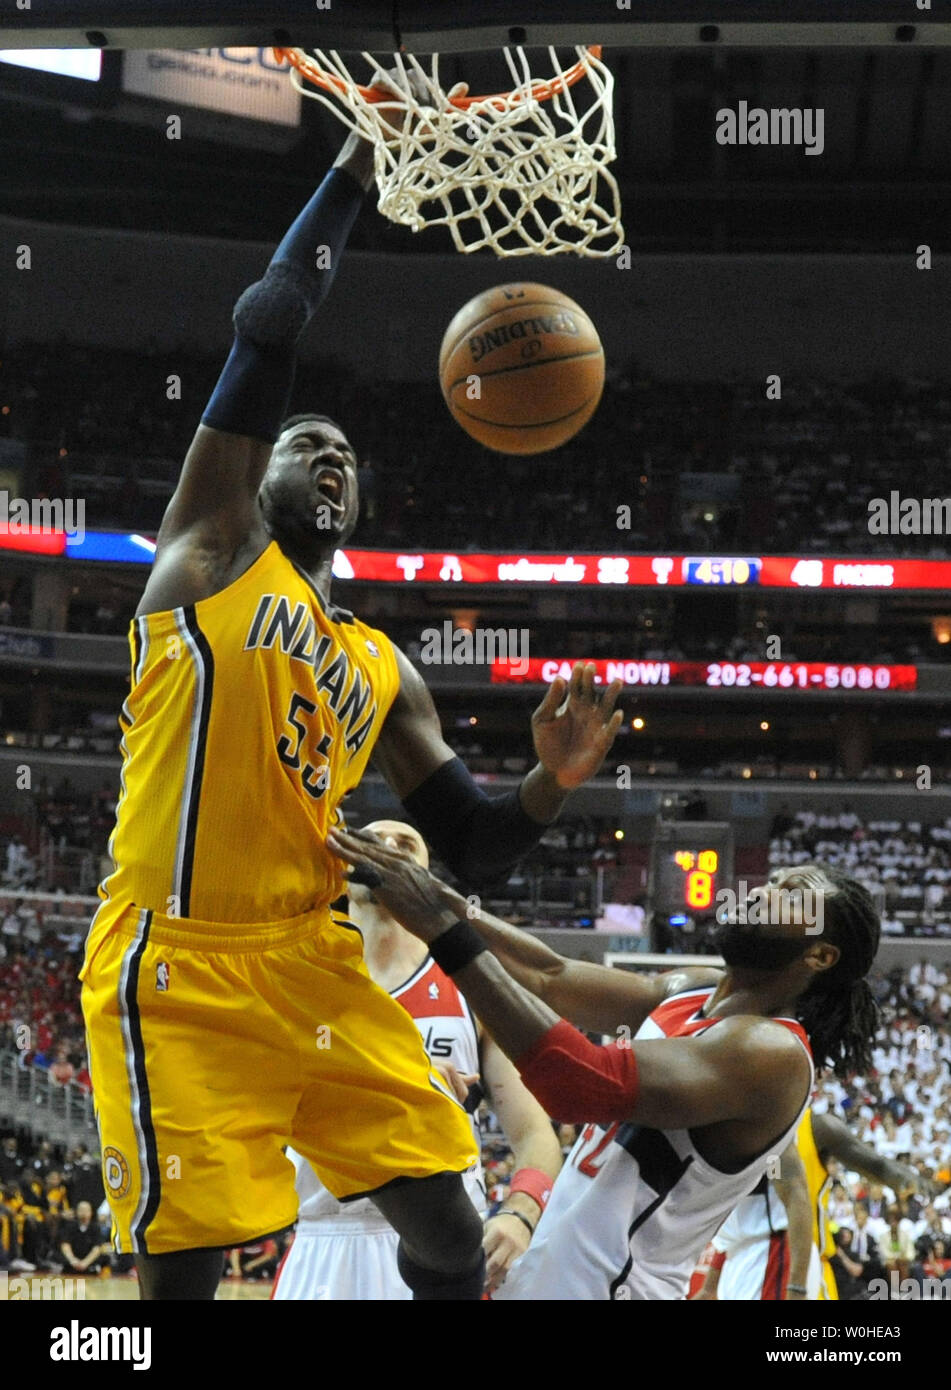 Indiana Pacers' Roy Hibbert shoots over Washington Wizards center